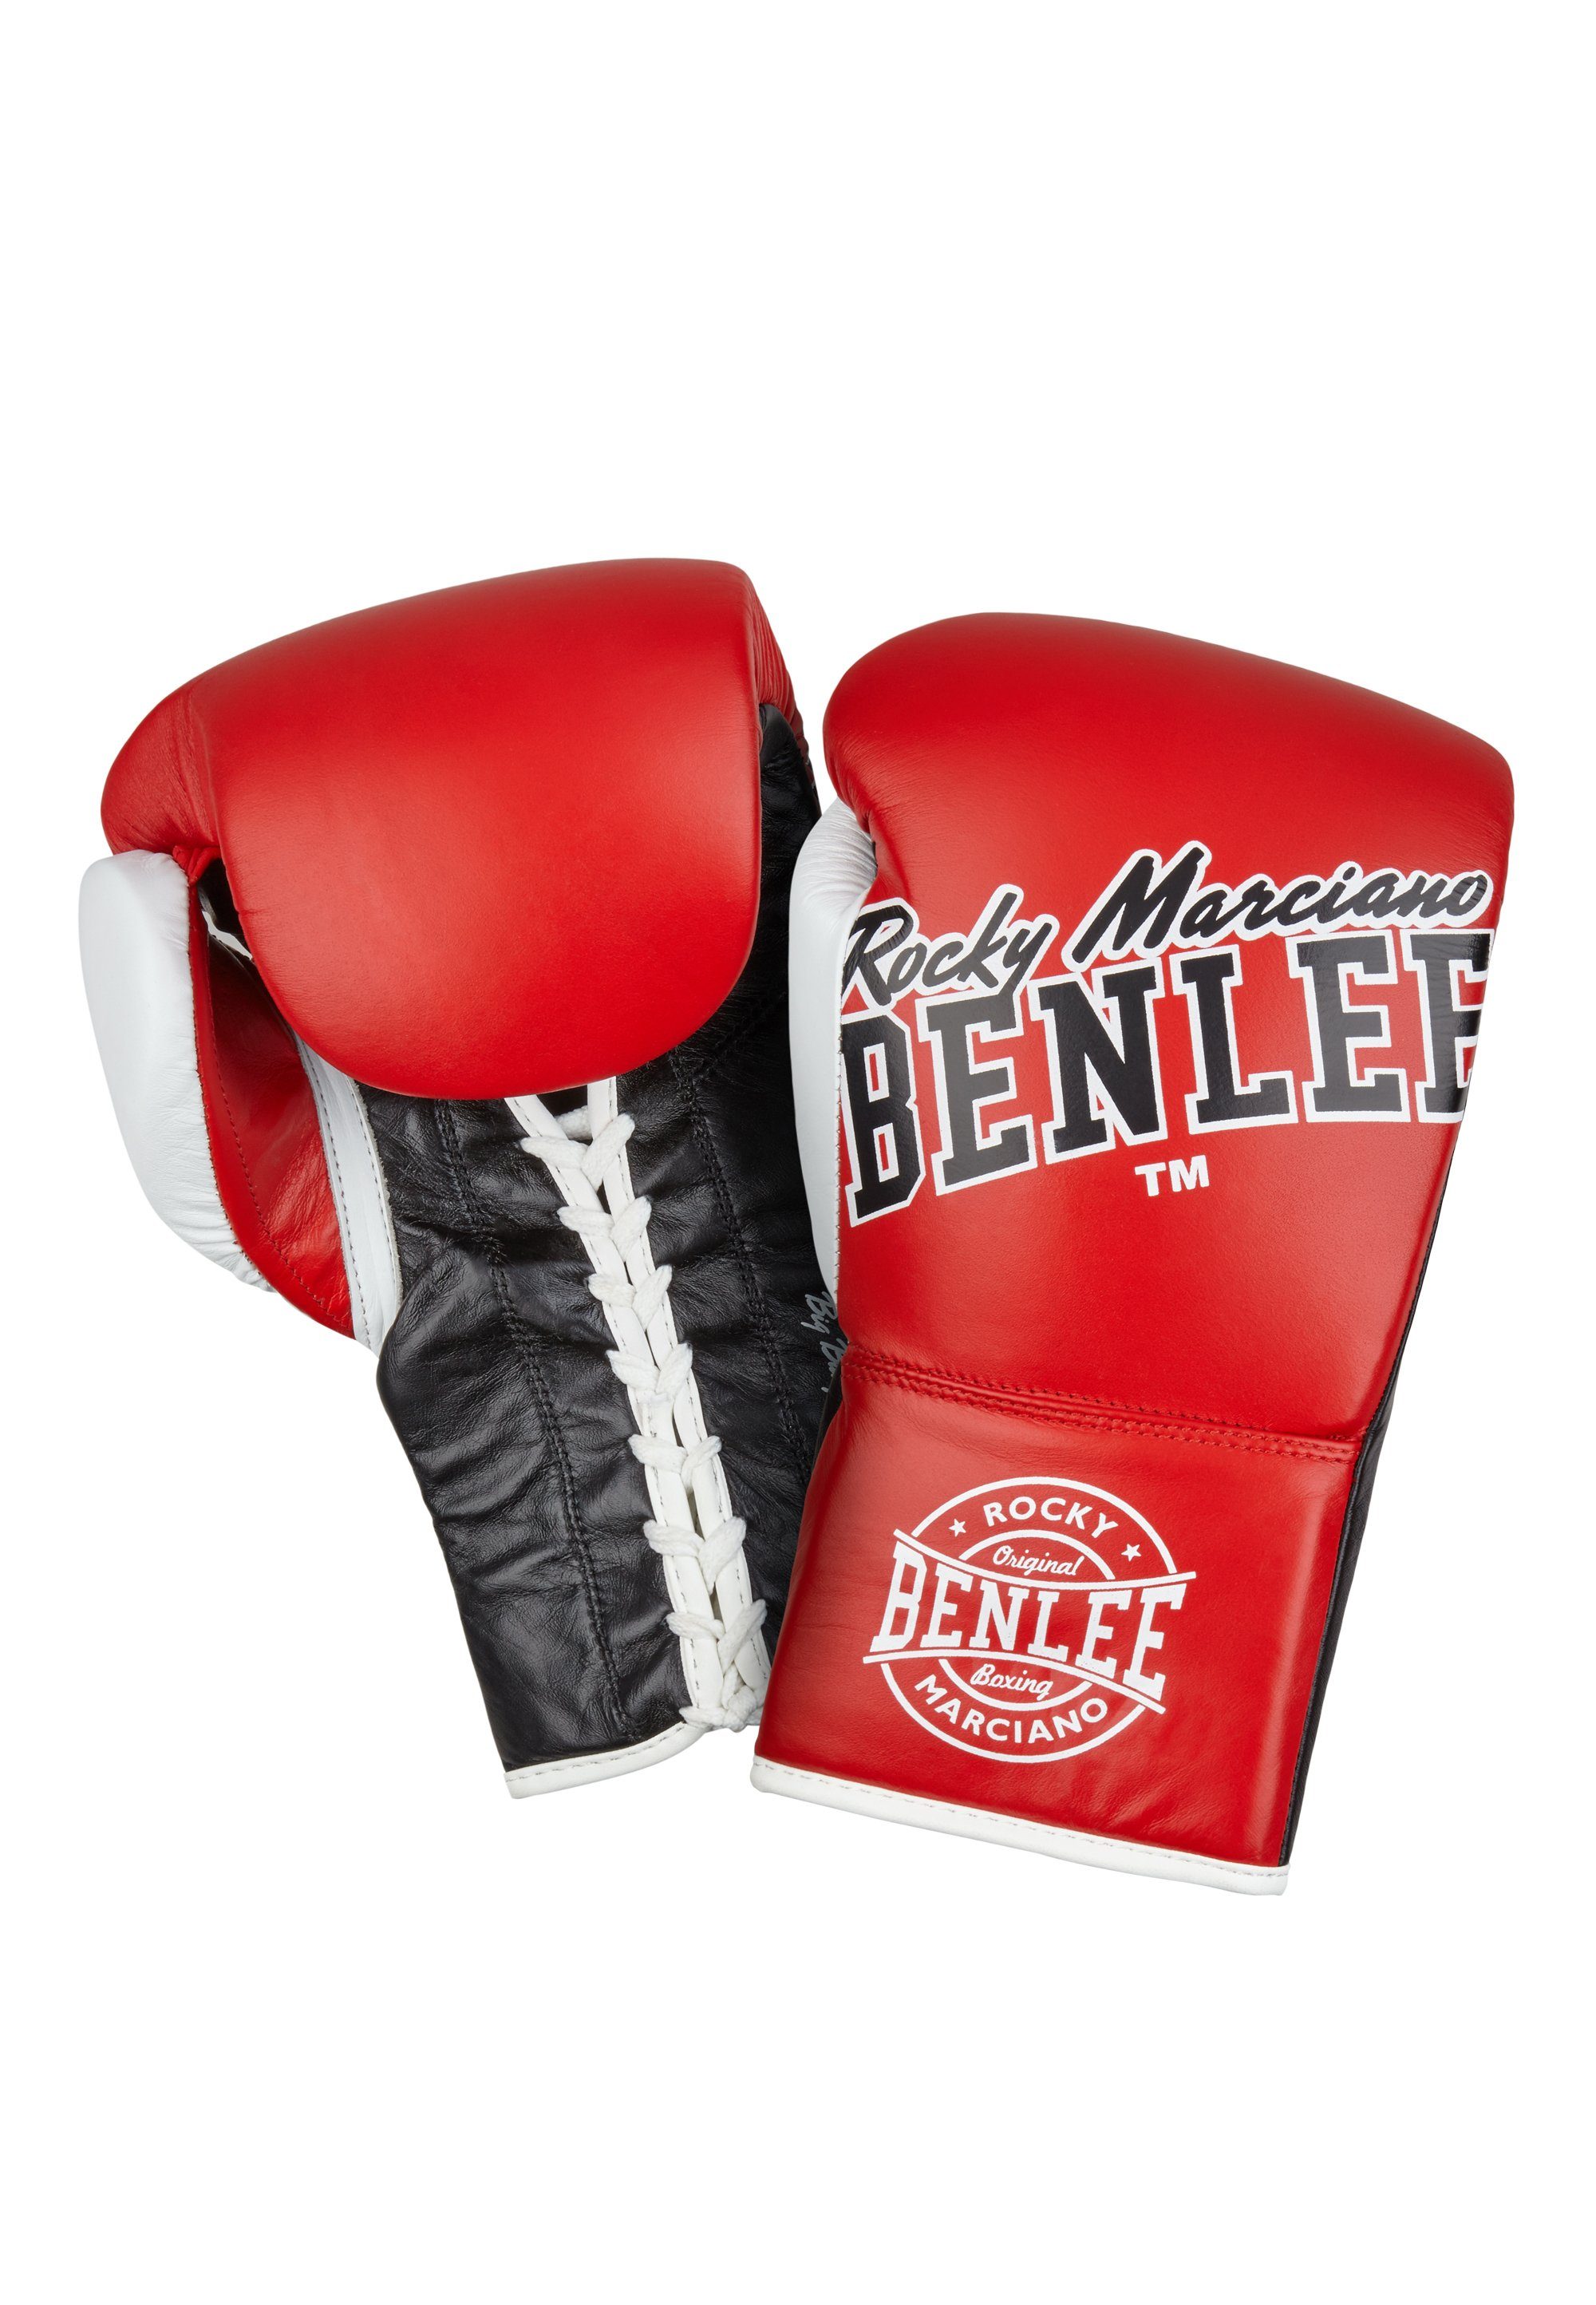 Benlee Rocky Marciano Boxhandschuhe BIG BANG Red